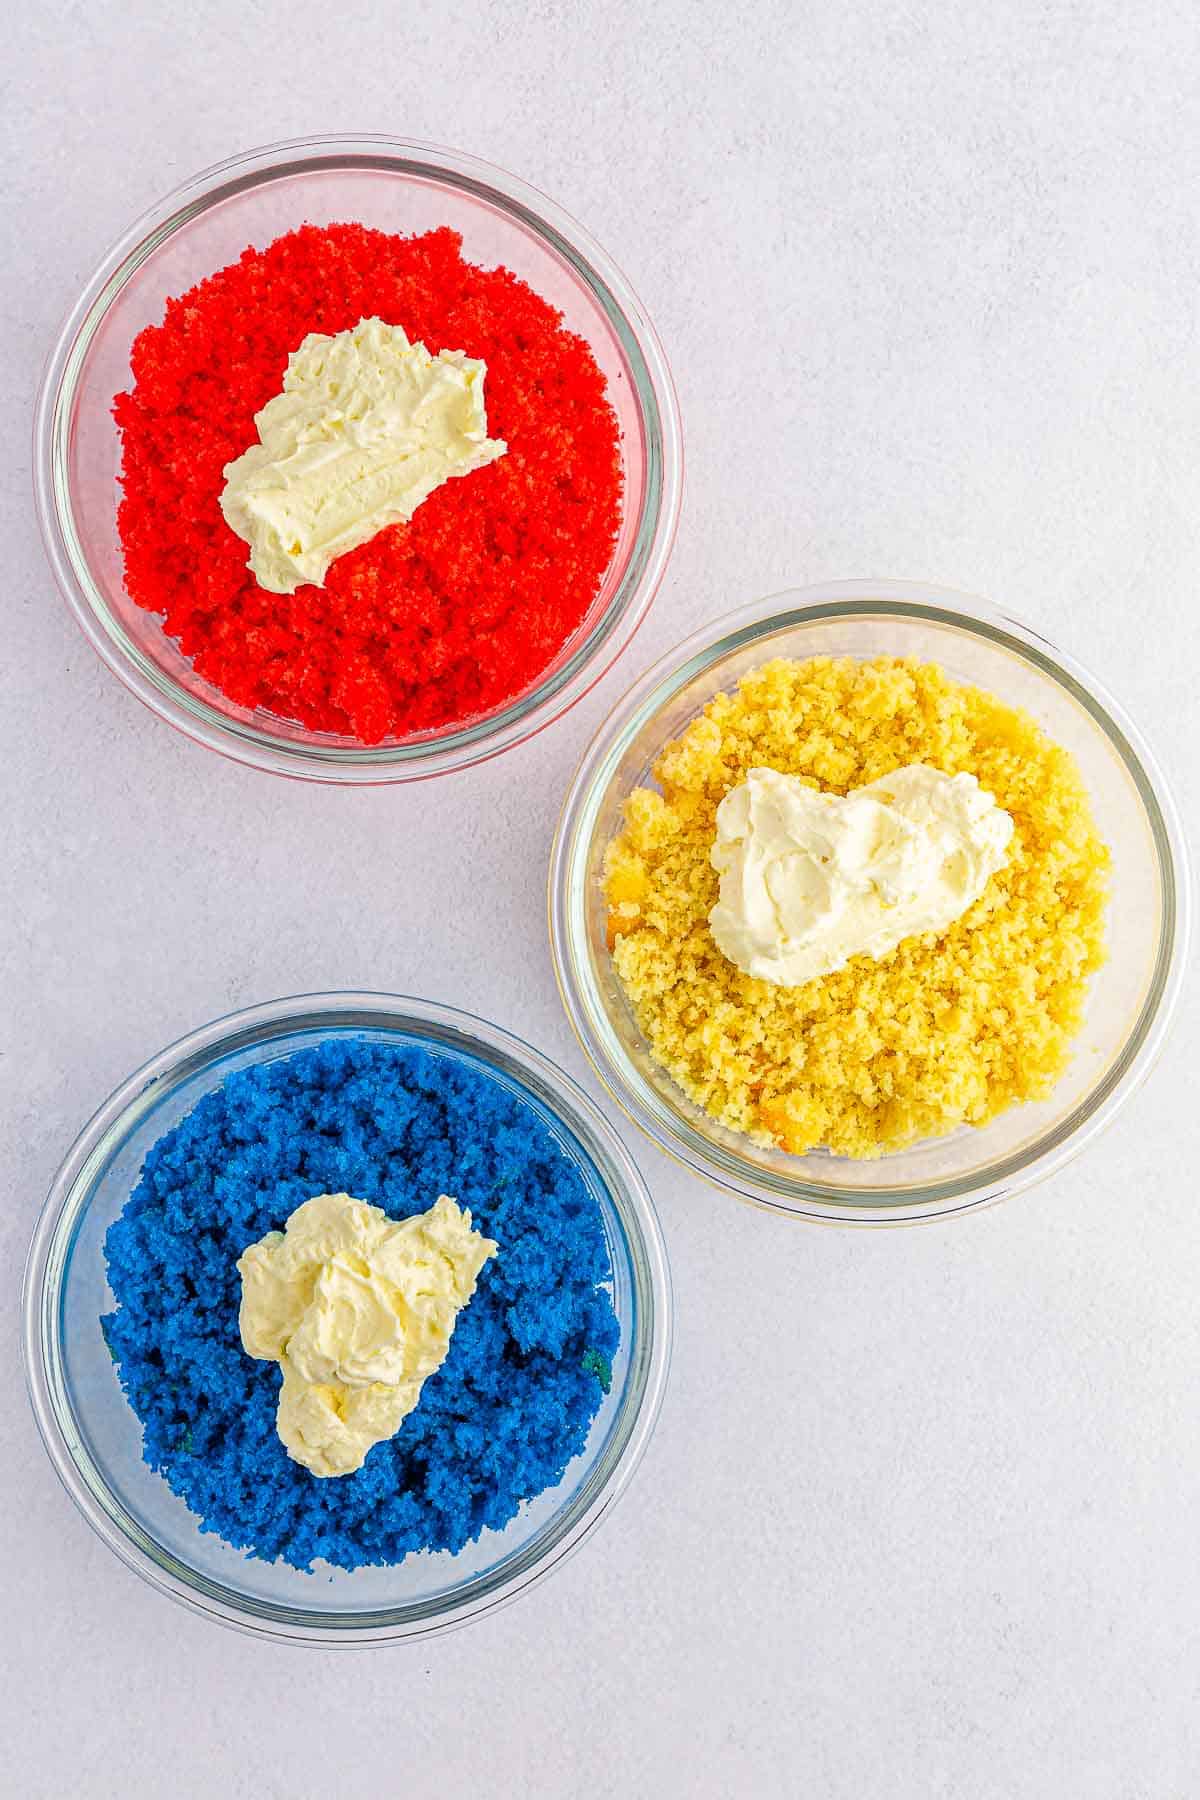 three bowls of crumbled cake batter with cream cheese on top. one blue, one red and one white.